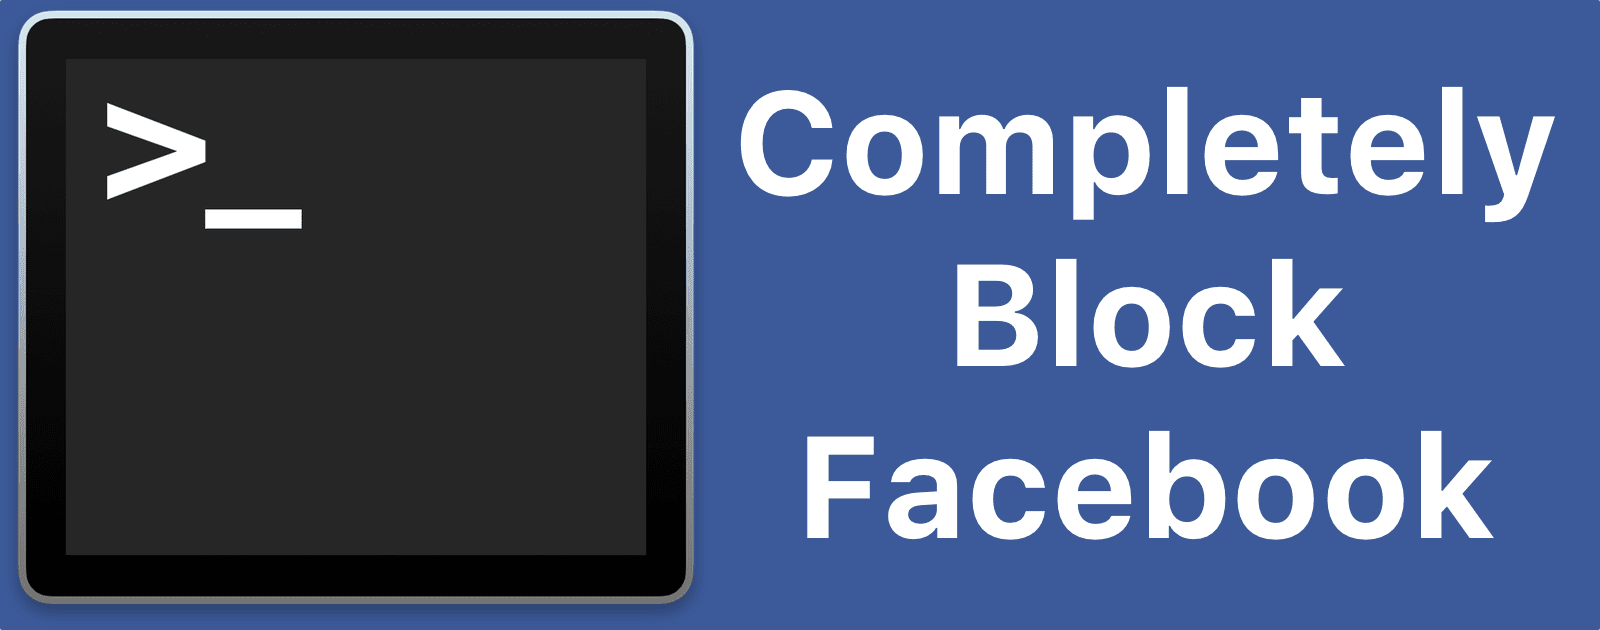 Going Nuclear: How to Block Facebook Completely From Your Mac [Update]